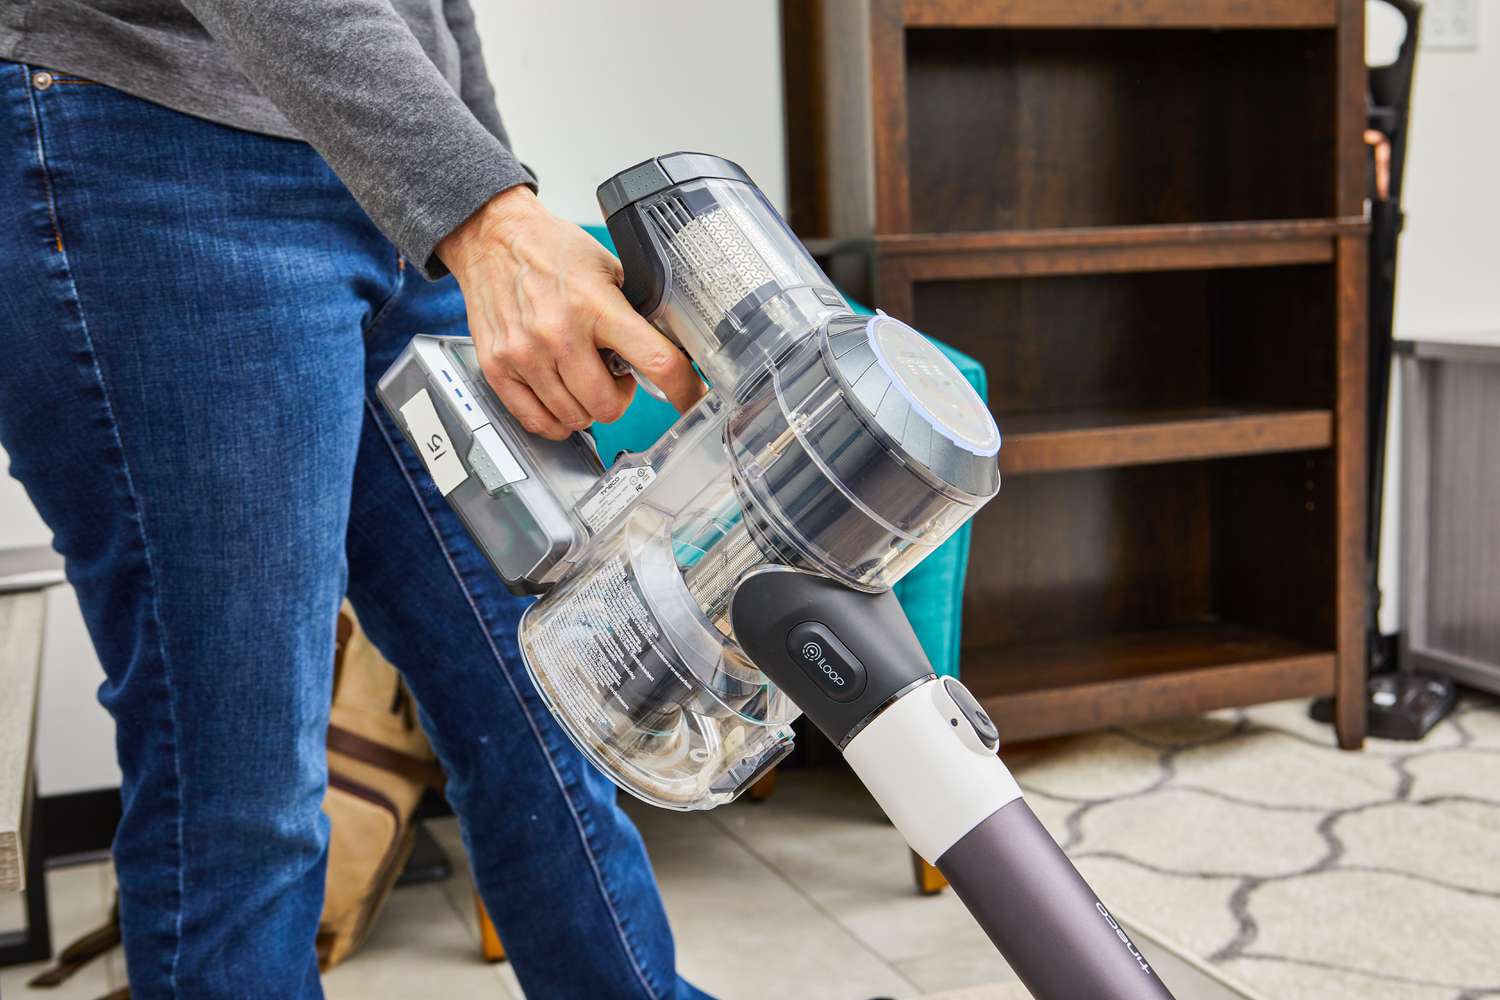 Hand holding Tineco Pure One S11 Smart Stick/Handheld Vacuum as it vacuums carpet